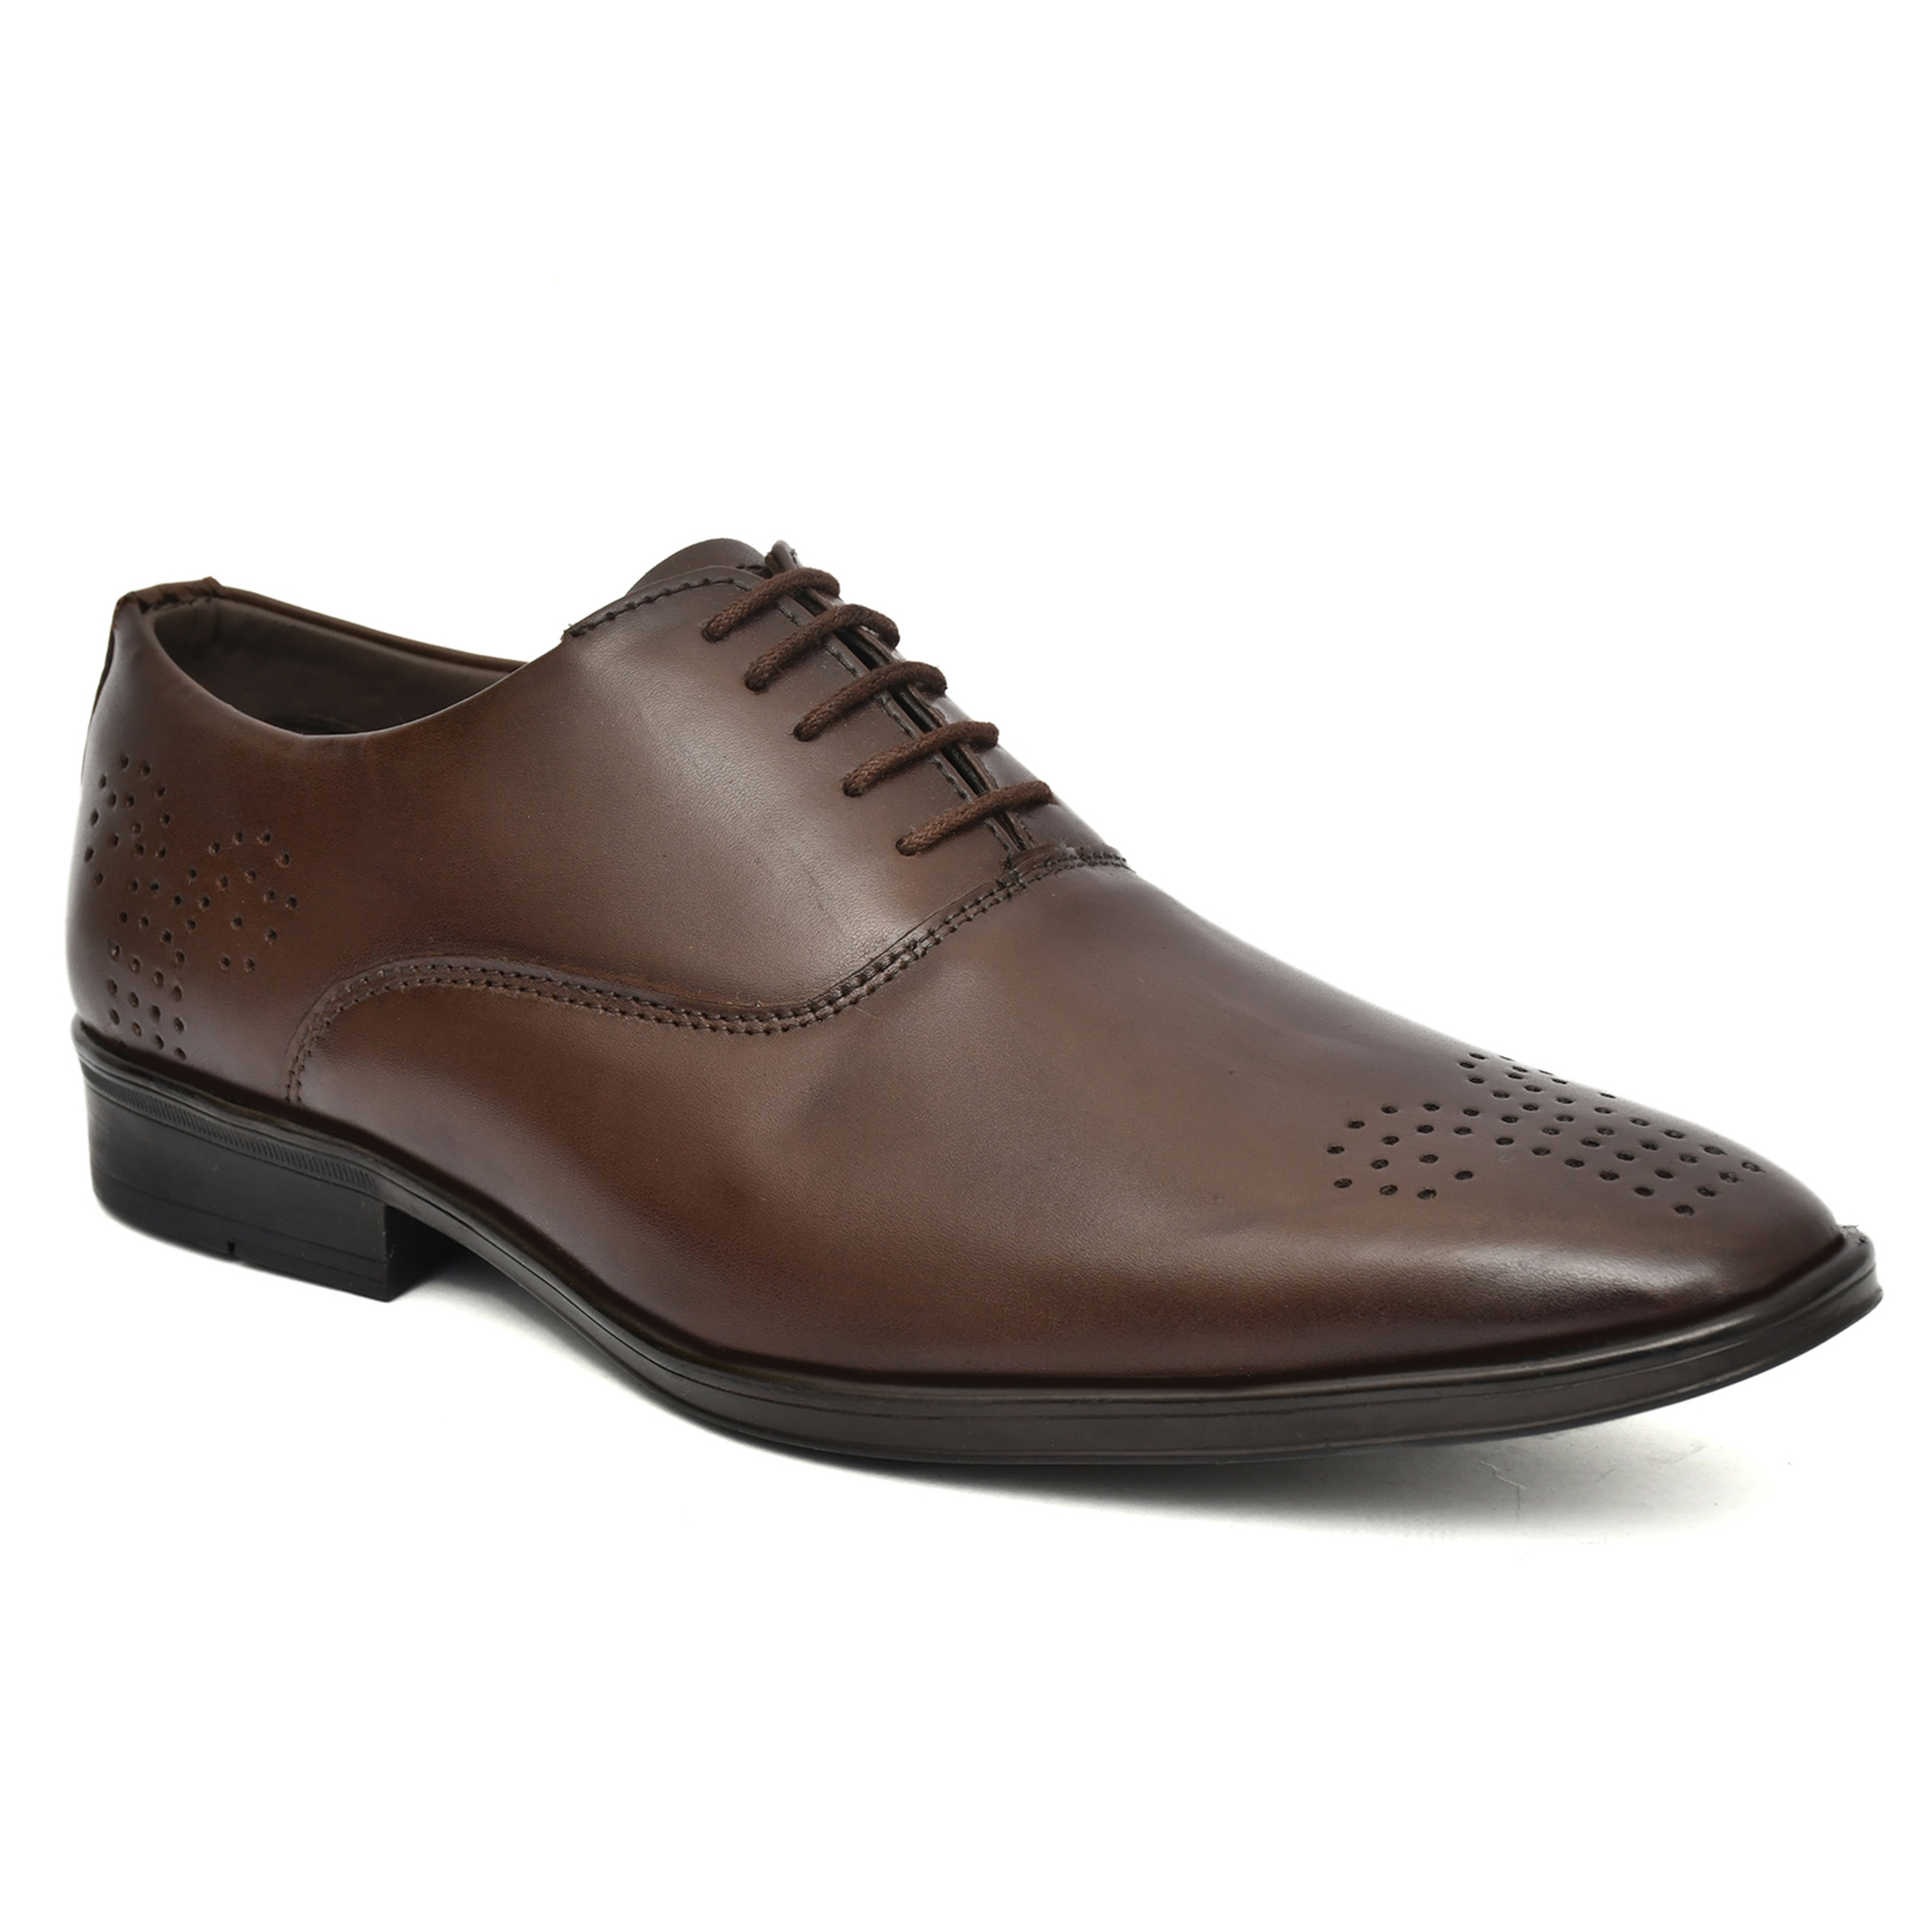 leather derby shoes for Men with Memory foam footpad by asm.